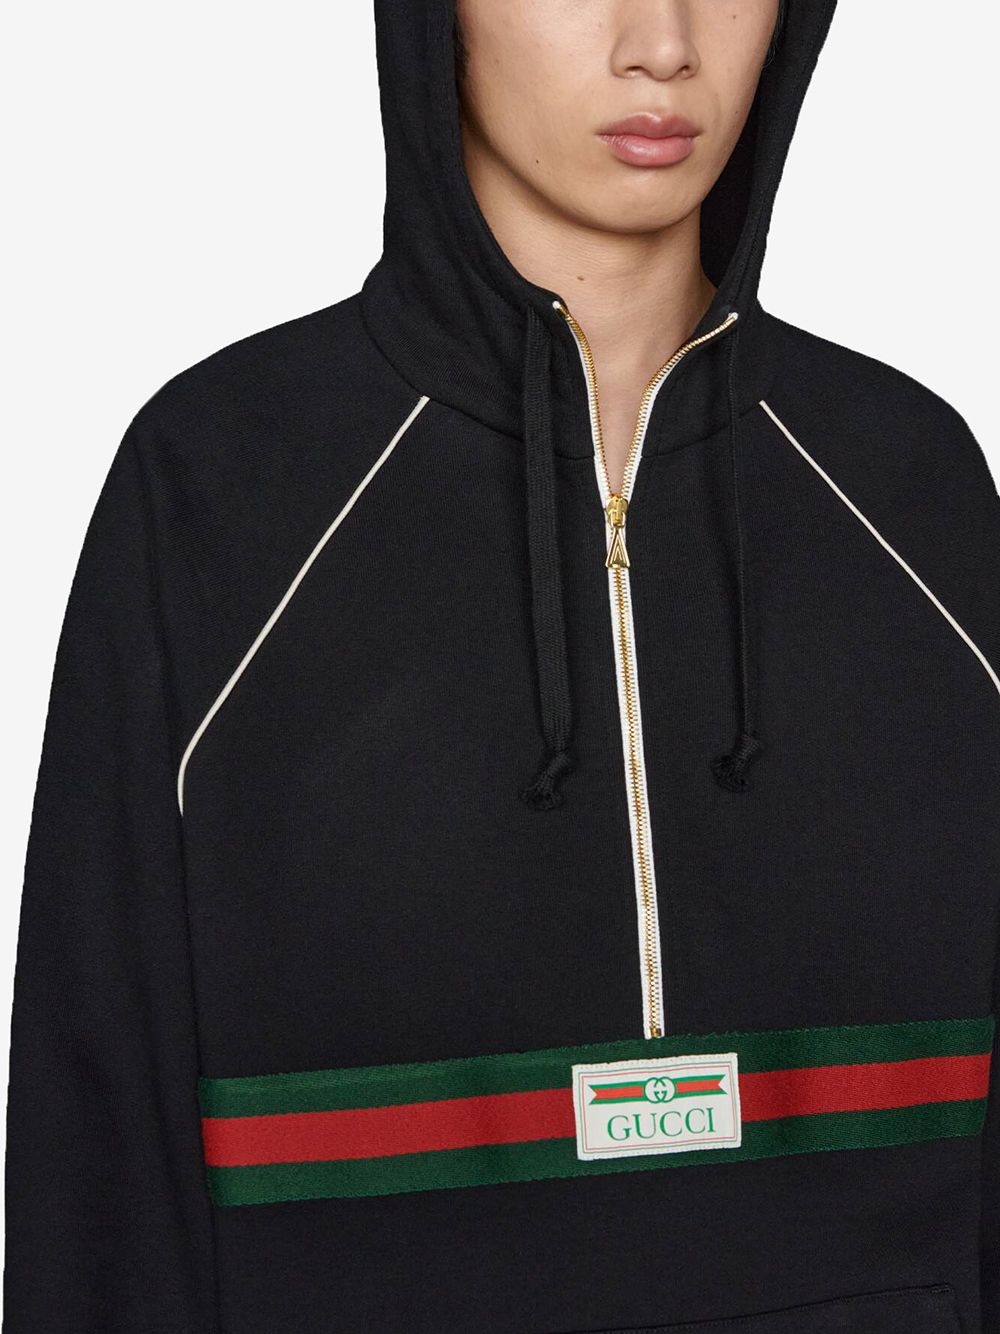 Shop GUCCI 2023 SS Pullovers Long Sleeves Plain Cotton Logo Luxury Hoodies  (700120_XJEXD_9095, 700120, 700120XJEXD9095, 700120 XJEXD 9095) by FORYOU31